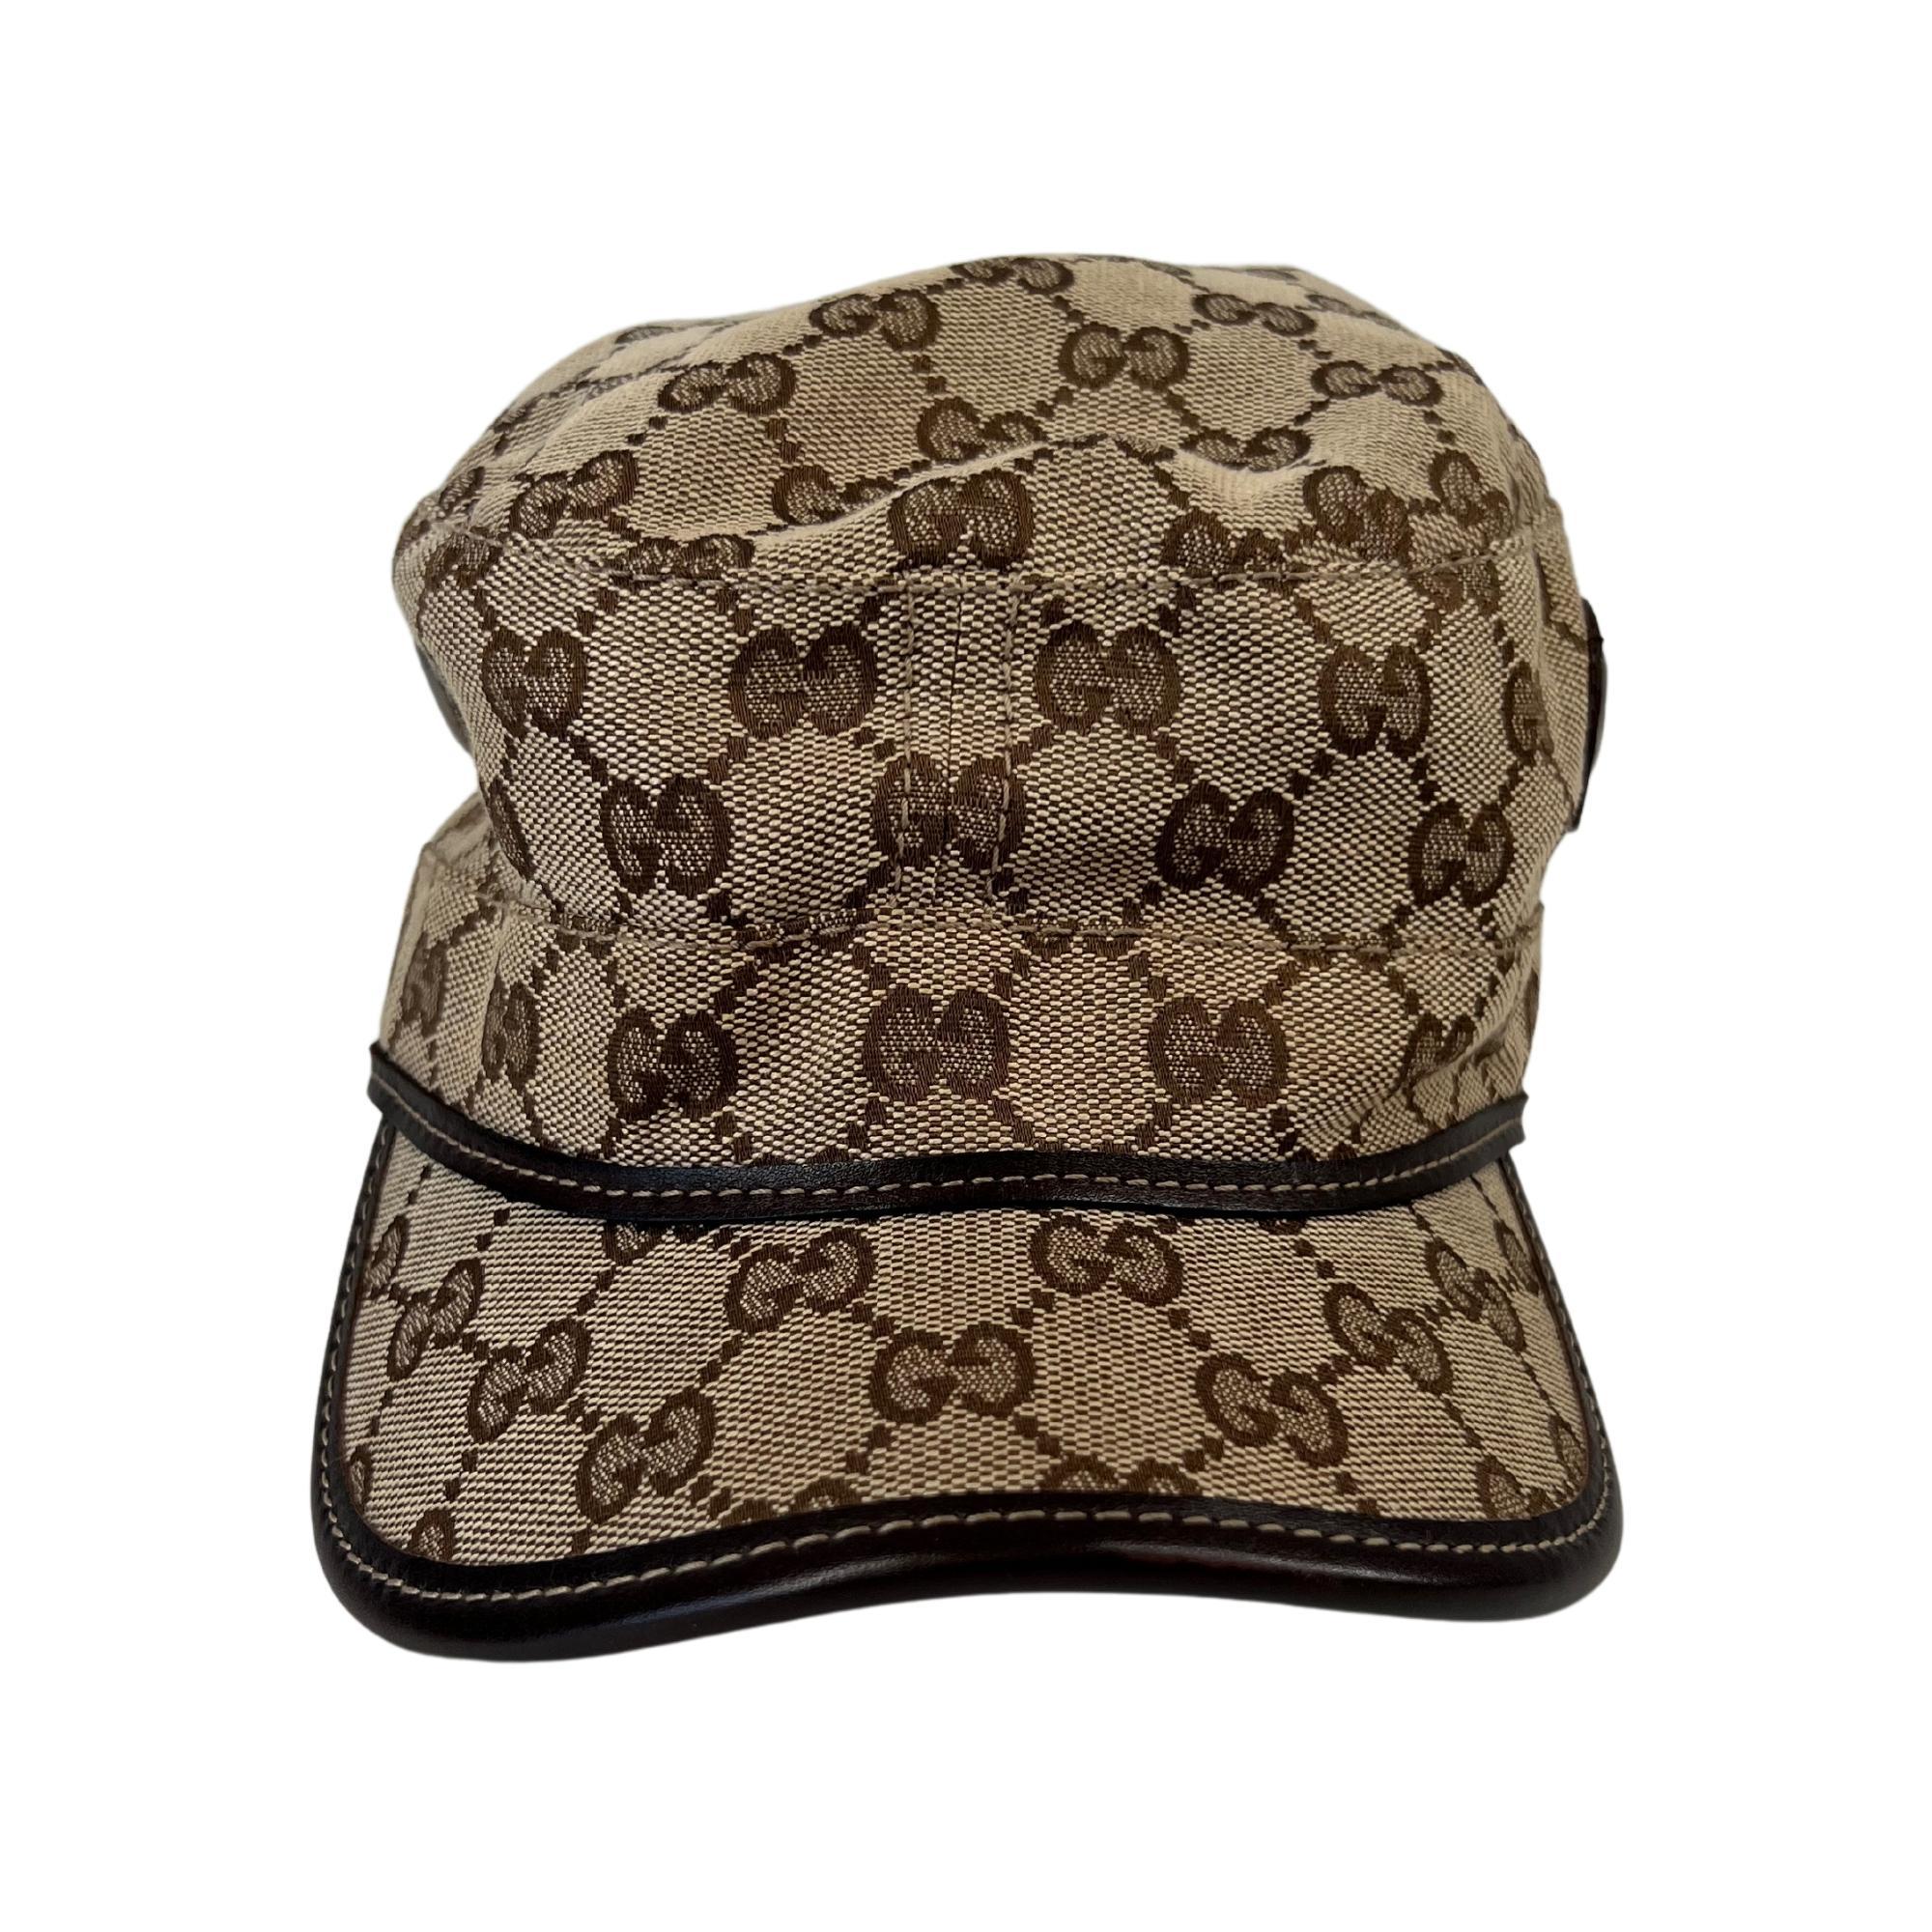 This hat features Gucci GG canvas in beige, leather trim, metal grommet detail, adjustable leather strap and buckle closure.

COLOR: Brown
MATERIAL: Cotton 32% and polyester 63%
ITEM CODE: 200037 FCEKN
SIZE: Small
CONDITION: Very good - lightly used